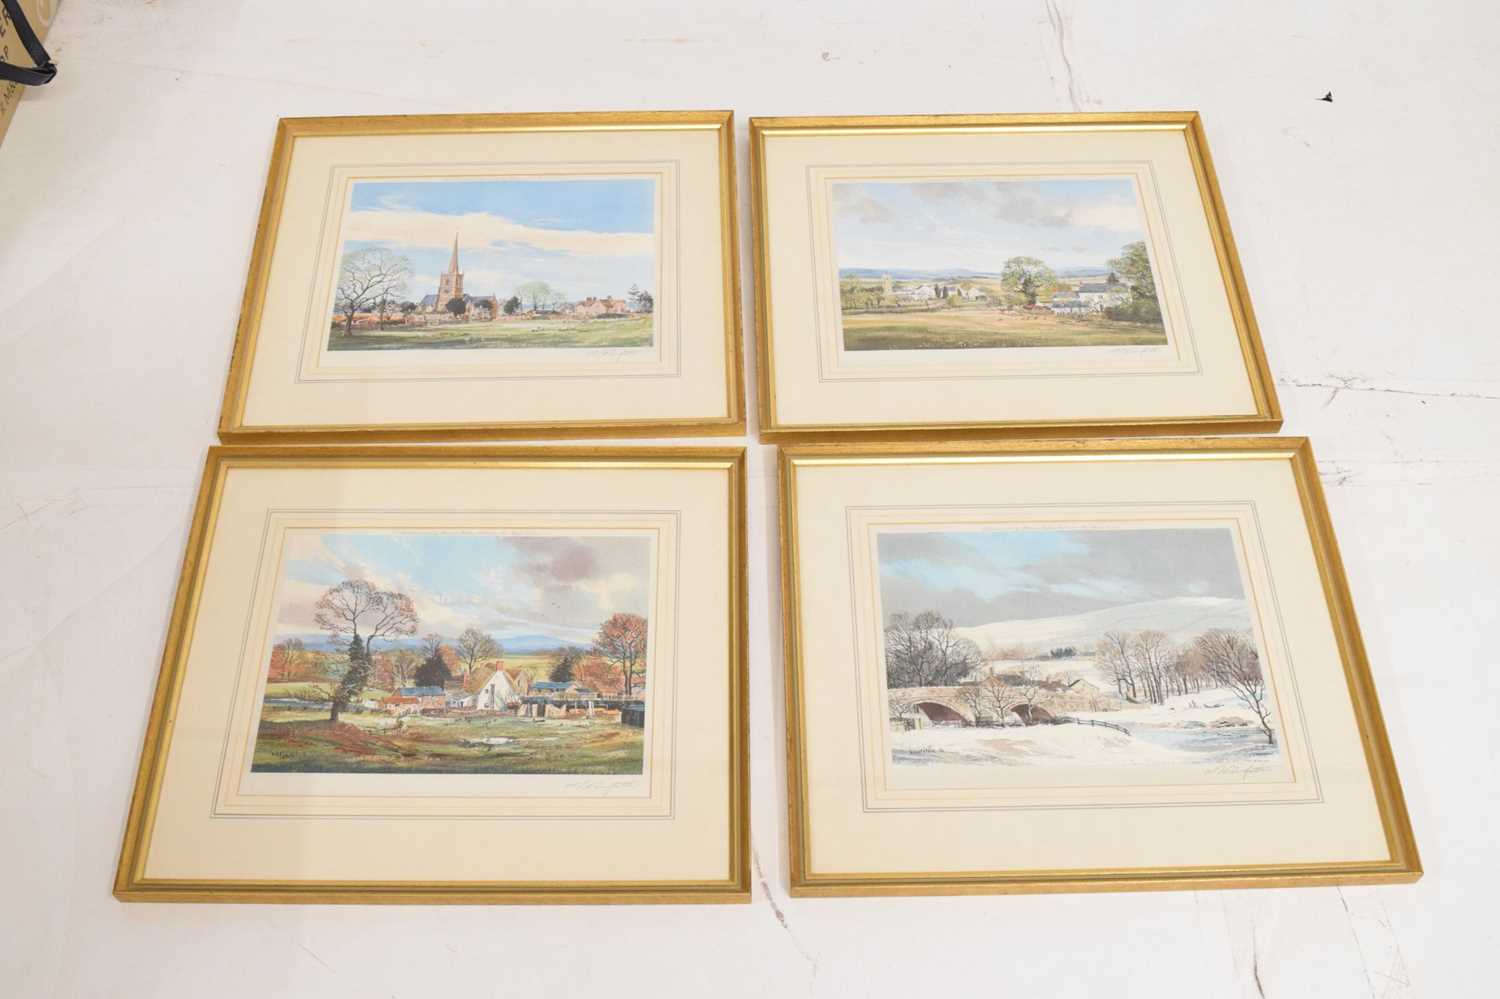 Michael Barnfather (b. 1934) - Set of four signed prints representing the Seasons - Image 12 of 13